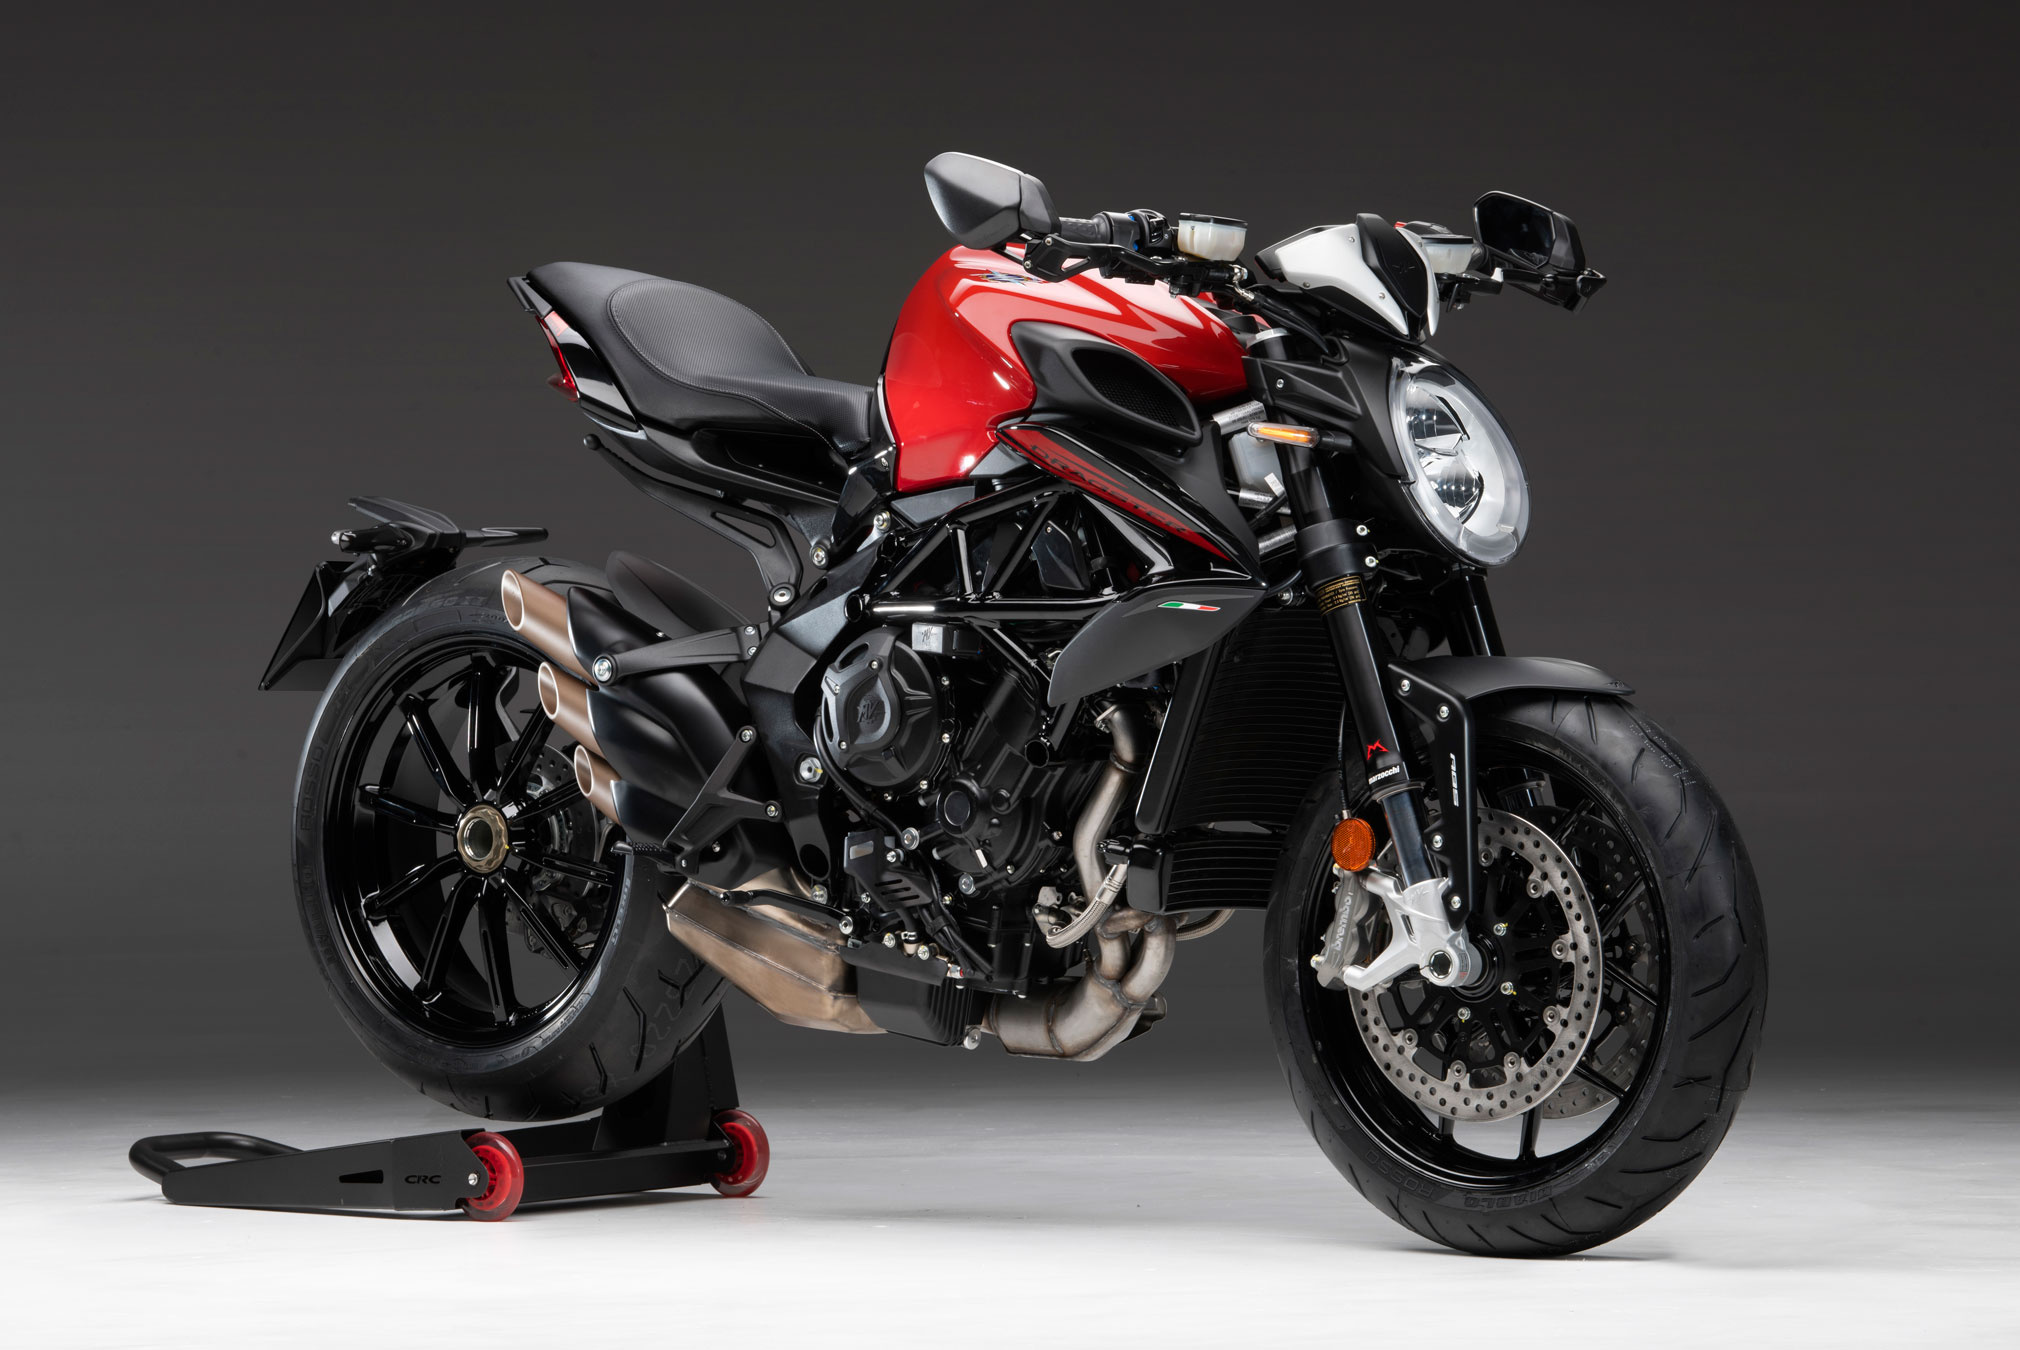 MV Agusta Dragster Rosso, Auto guide, Total motorcycle, 2020, 2020x1350 HD Desktop